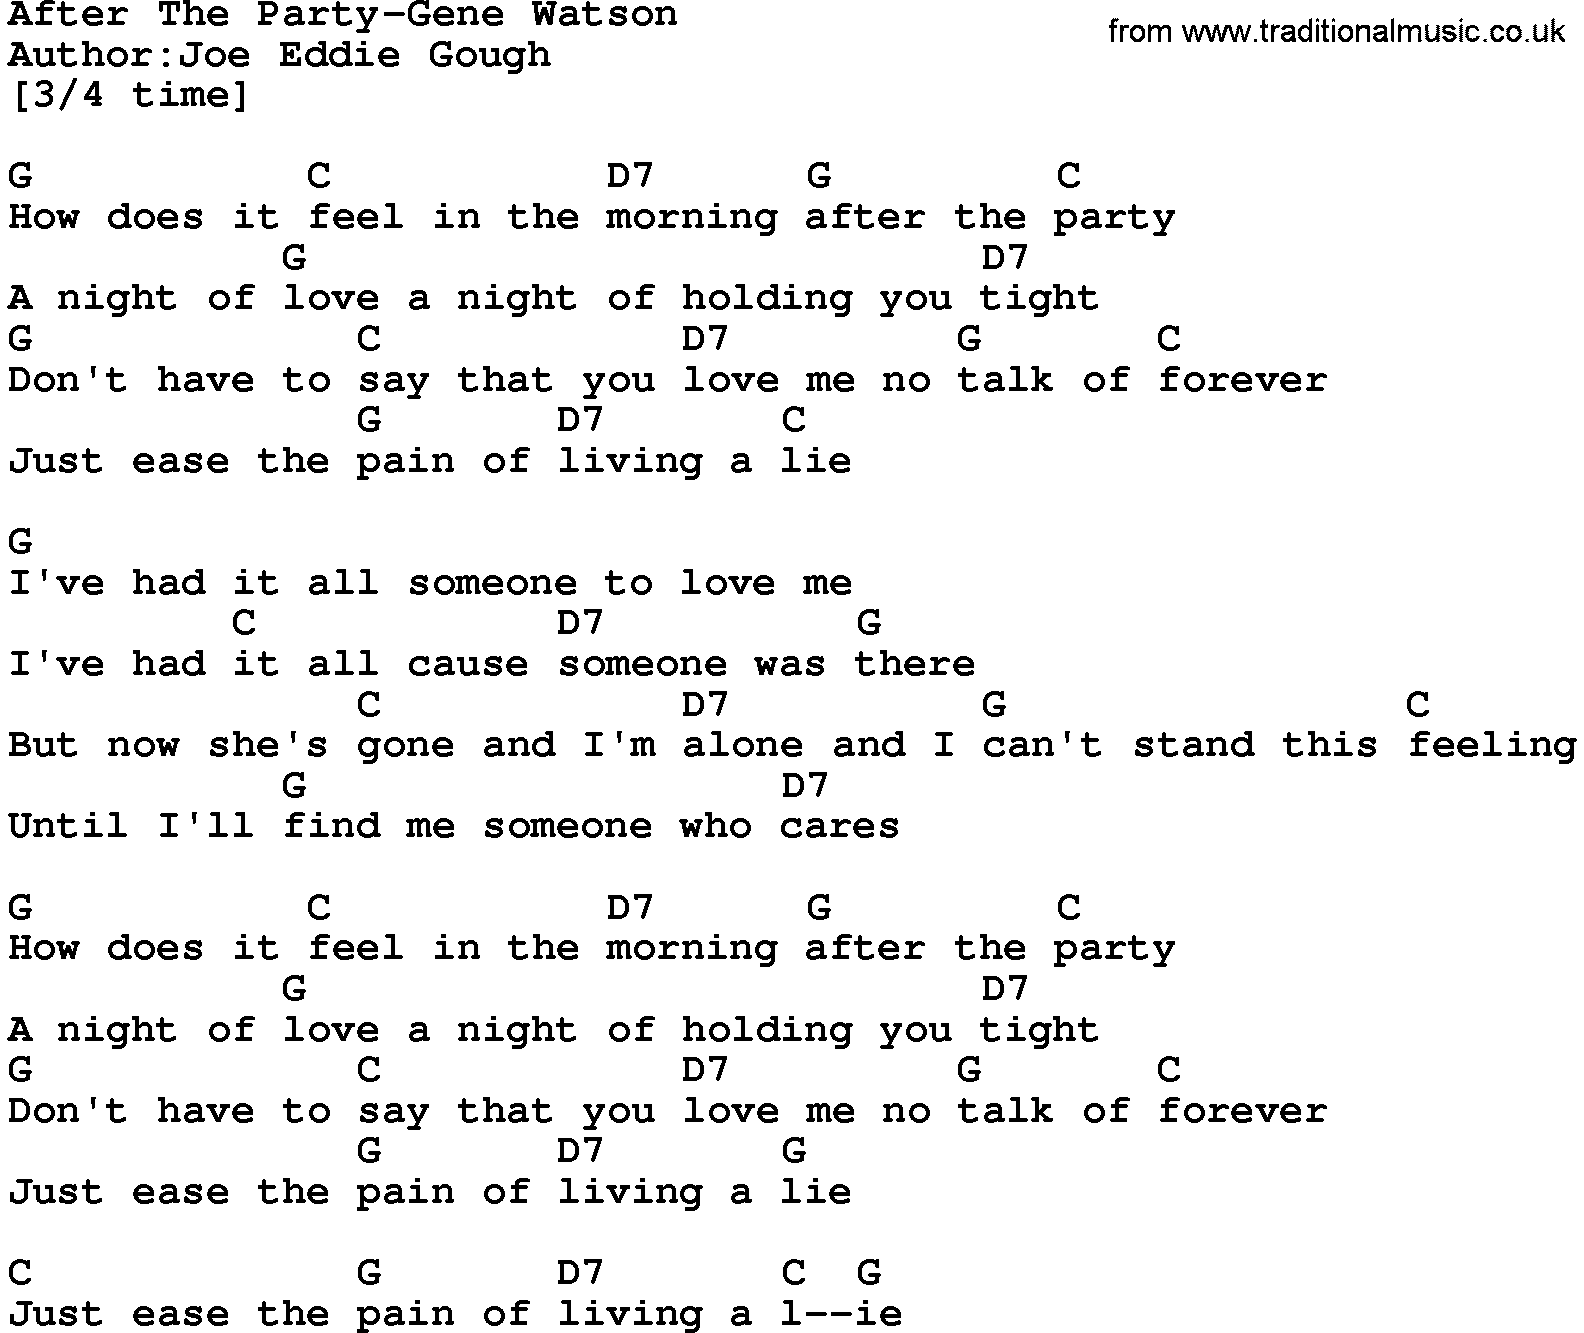 Country music song: After The Party-Gene Watson lyrics and chords